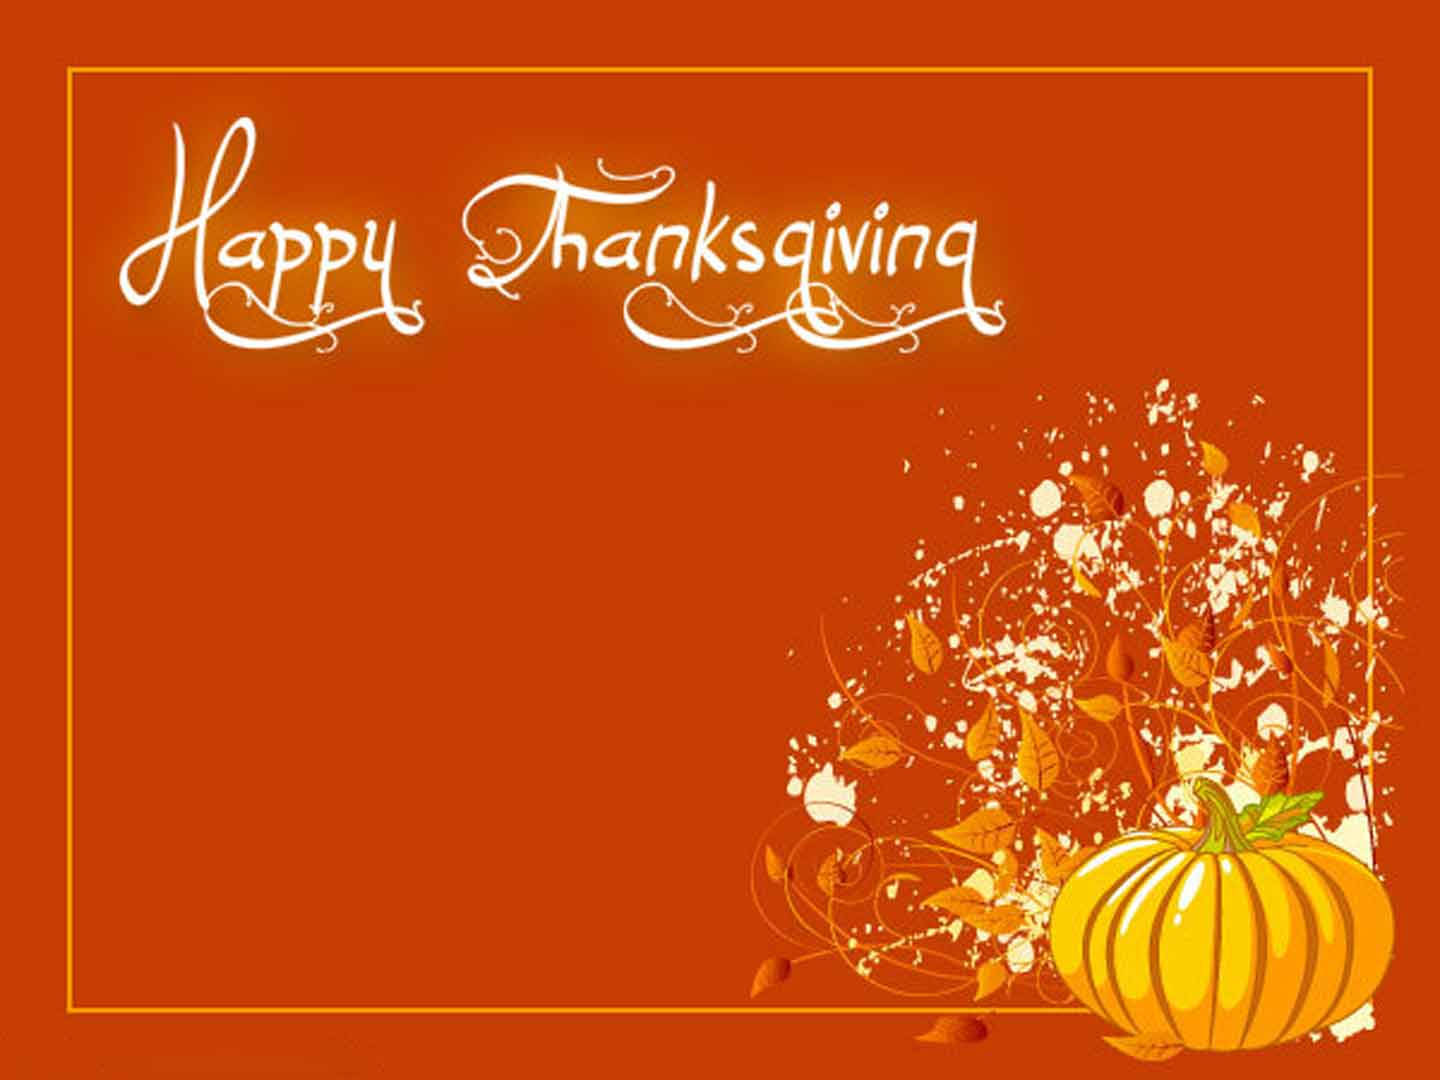 Thanksgiving Greetings With Glowing Pumpkin Background